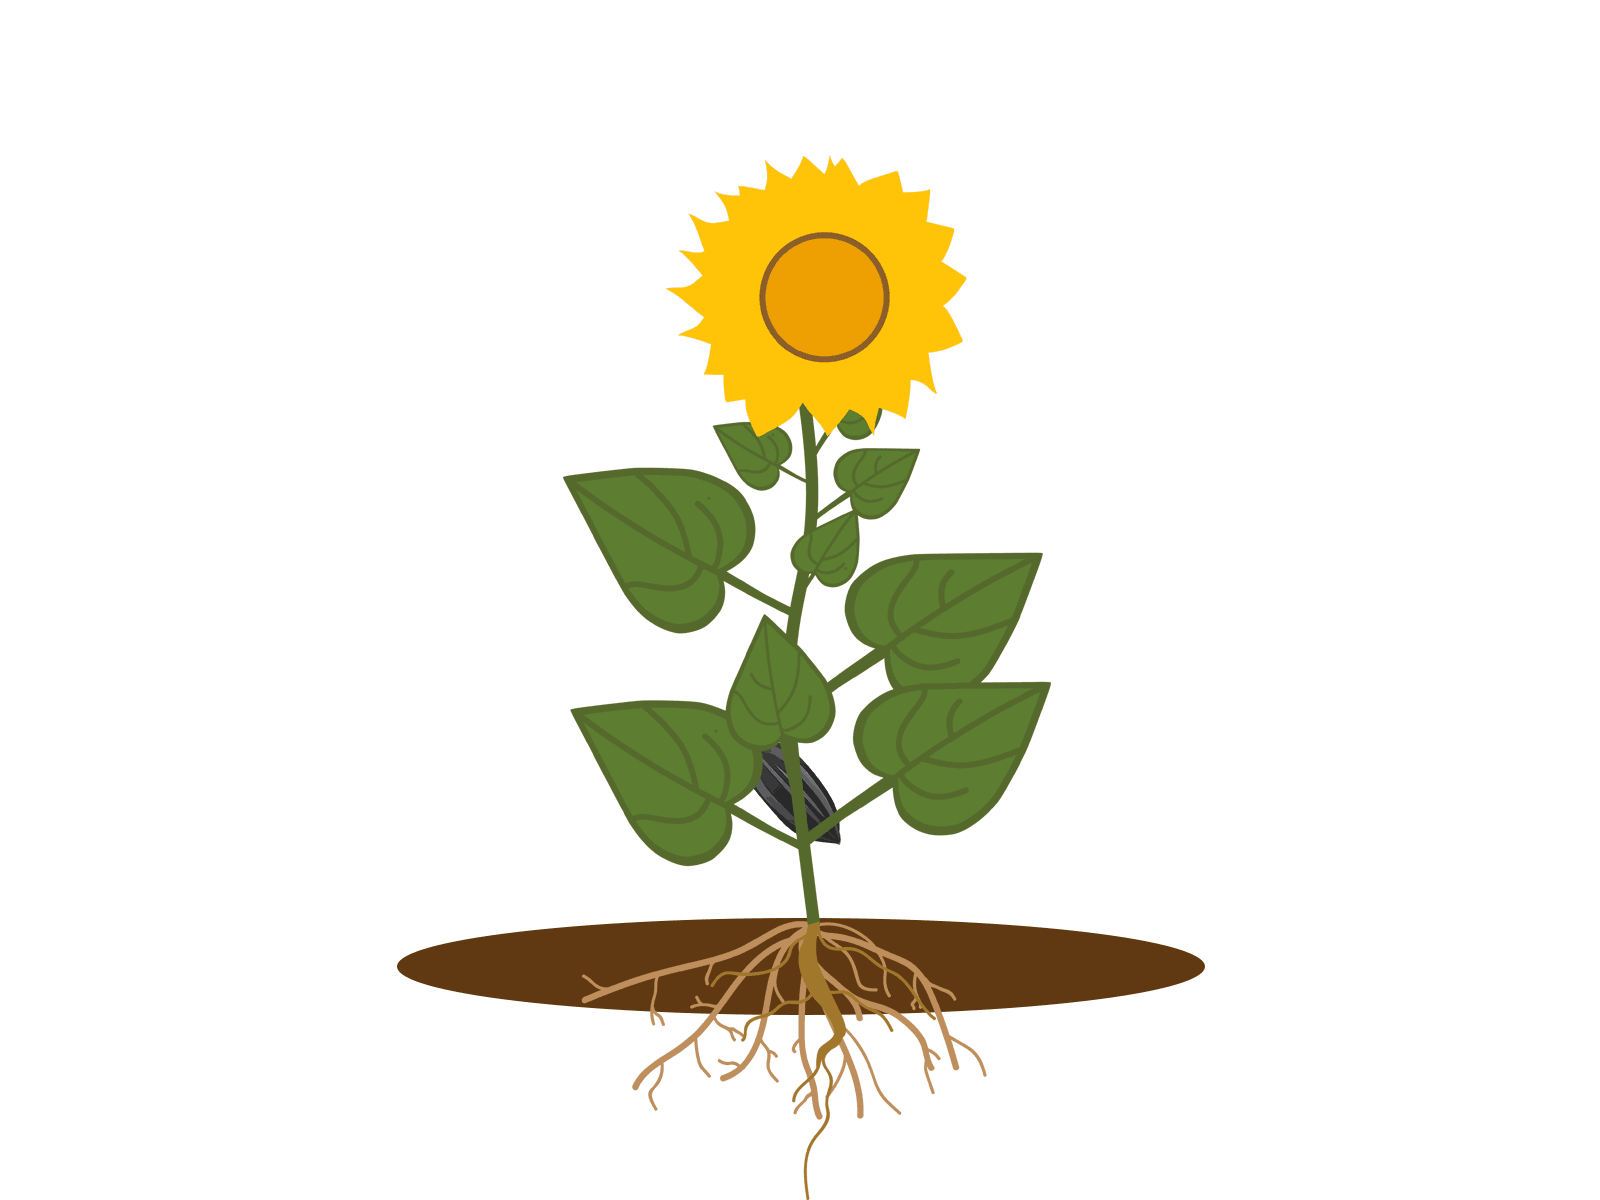 Animation of The Life Cycle of a Sunflower animation cycle illustration ui ukraine ukraine symbol